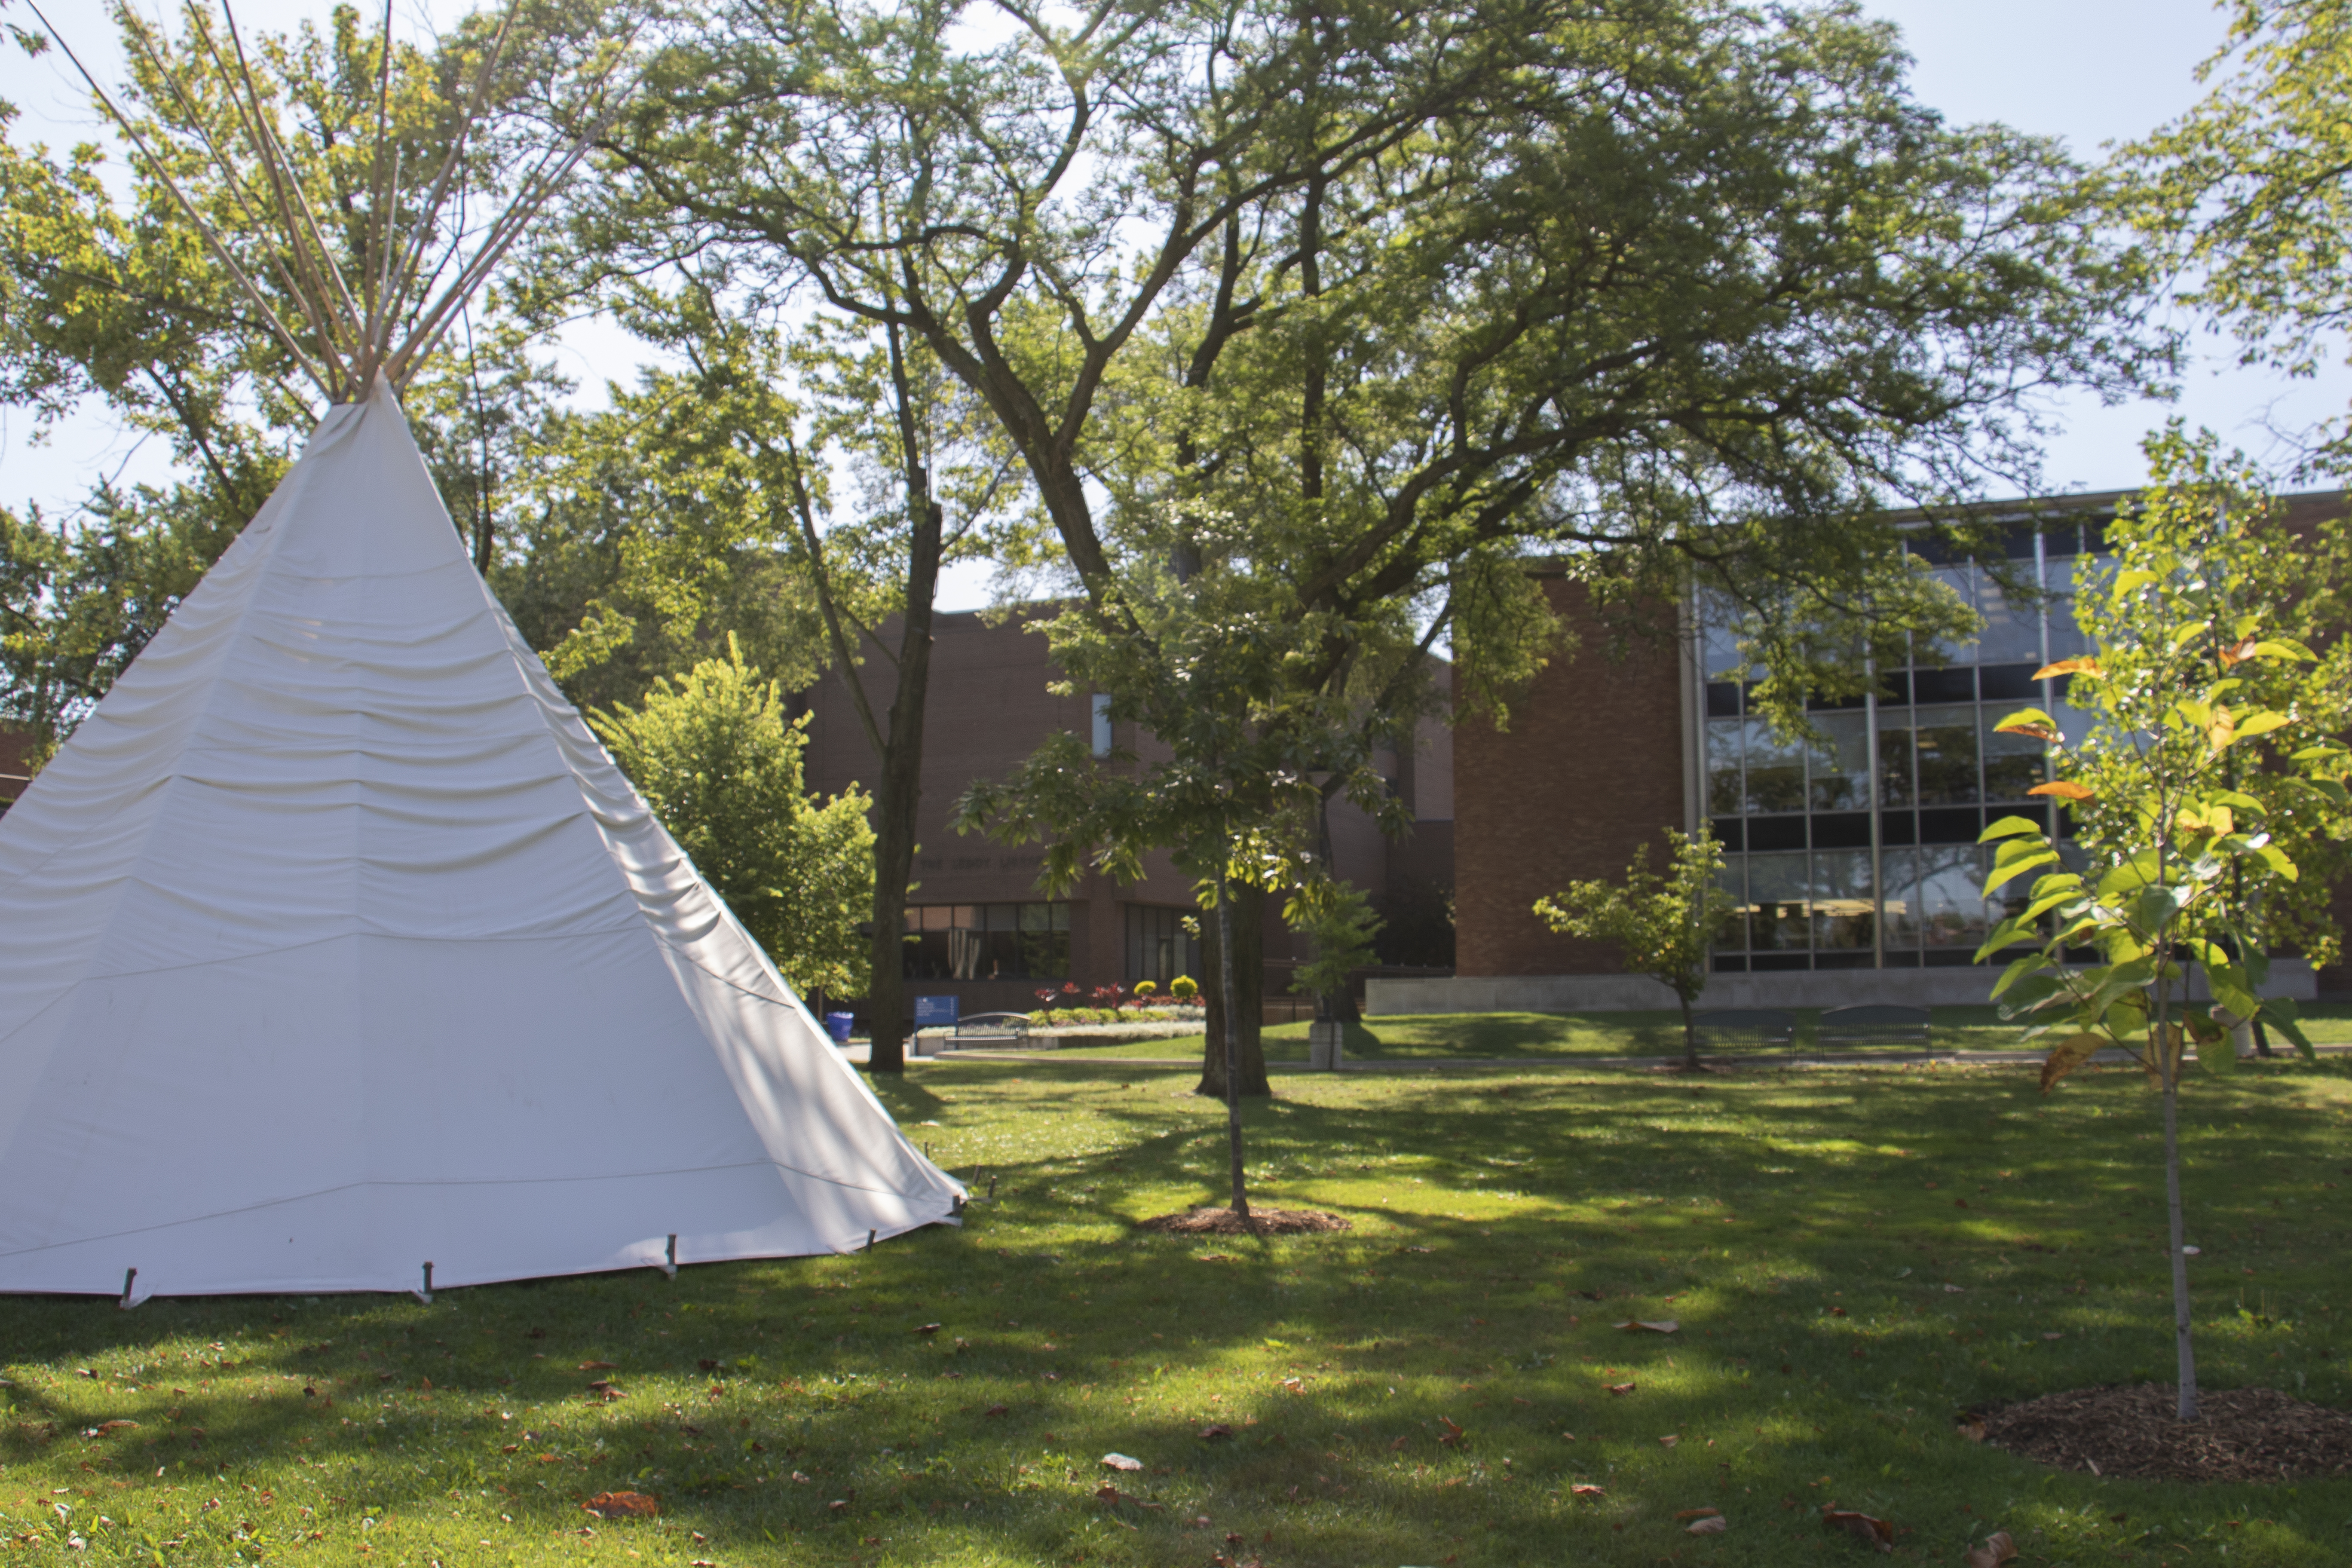 Leddy Library building with tipi set up outside.